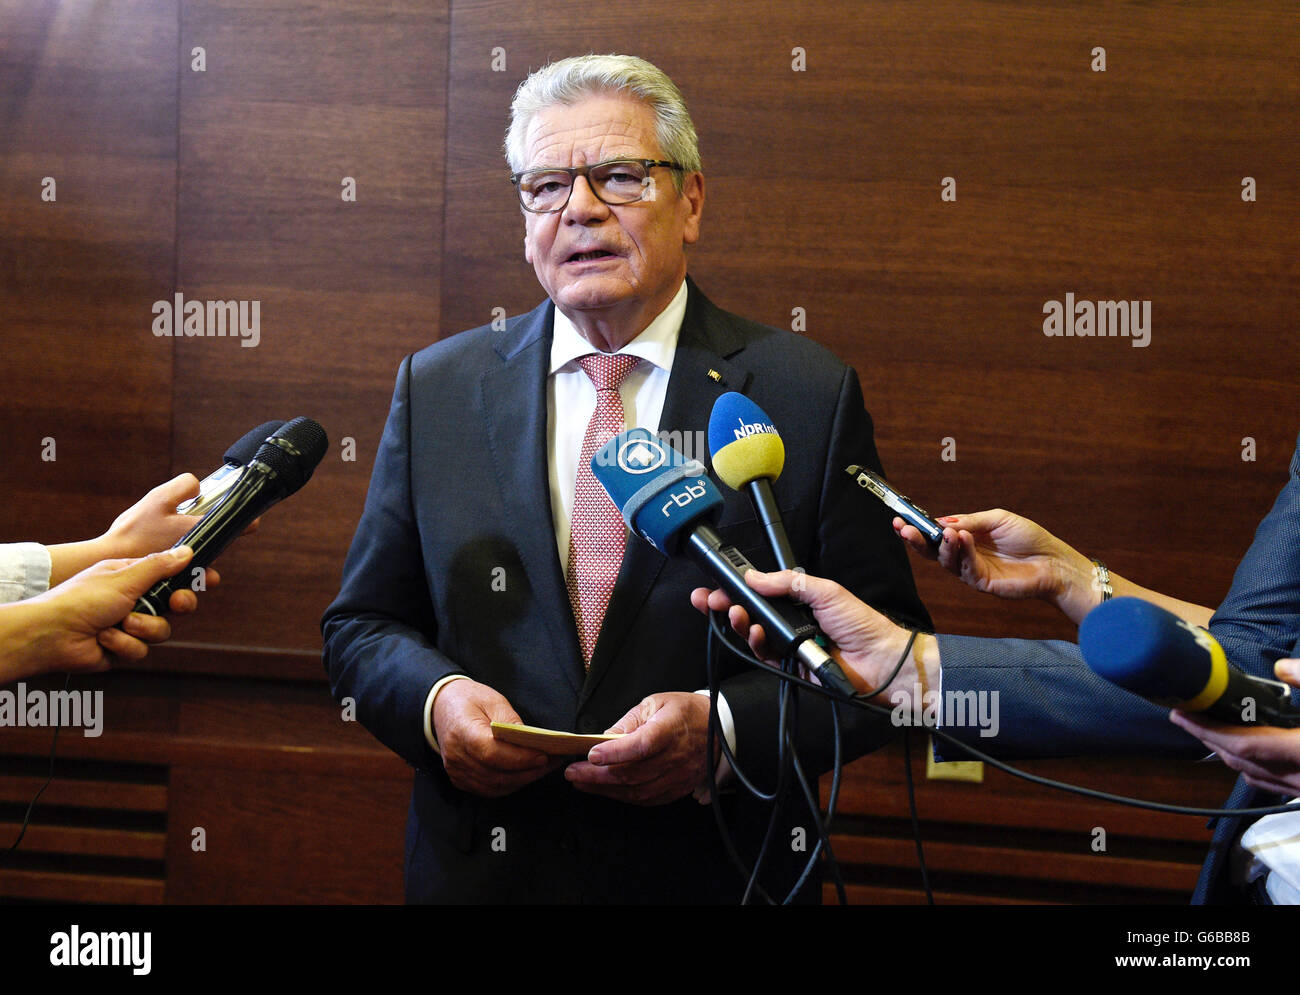 Sofia, Bulgaria. 24th June, 2016. German President Joachim Gauck delivers a statement after Britain voted to leave the European Union (EU) in a referendum held on 23 June, during his visit to Sofia, Bulgaria, 24 June 2016. Gauck expressed his concern after the Brexit referendum. 'Many good Europeans are sad today, ' Gauck said at an event in Sofia on 24 June. Photo: RAINER JENSEN/dpa/Alamy Live News Stock Photo